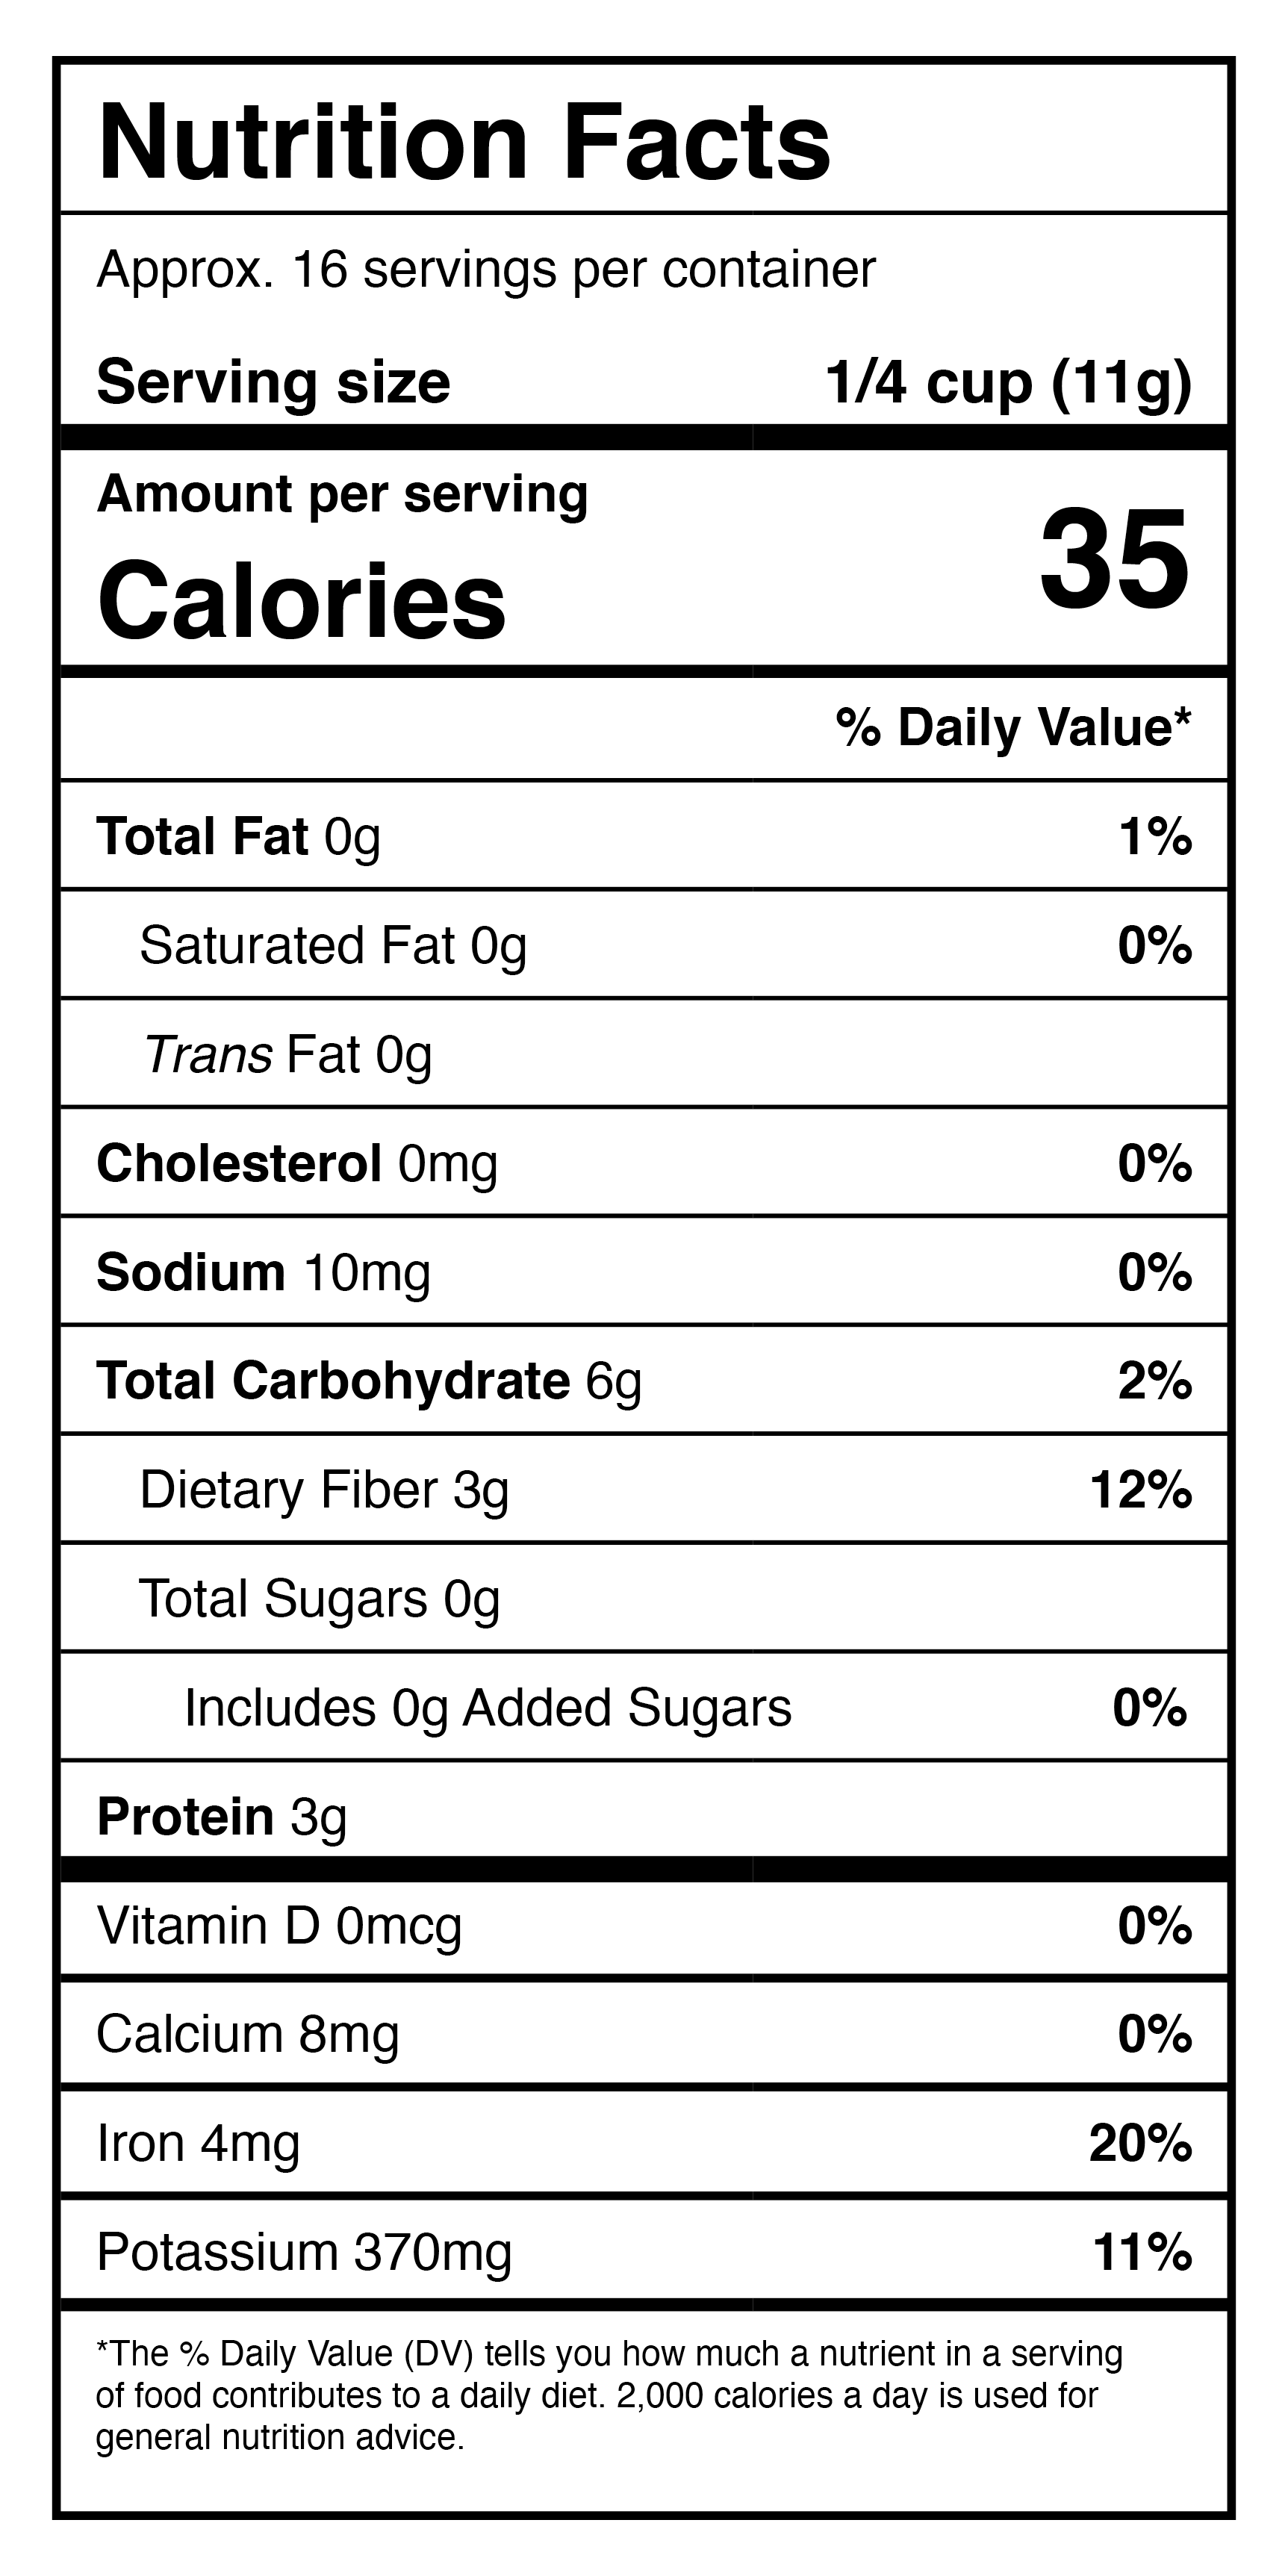 A nutrition label showing the ingredients of Harmony House Dried Mushrooms, Bits and Pieces (6 oz).